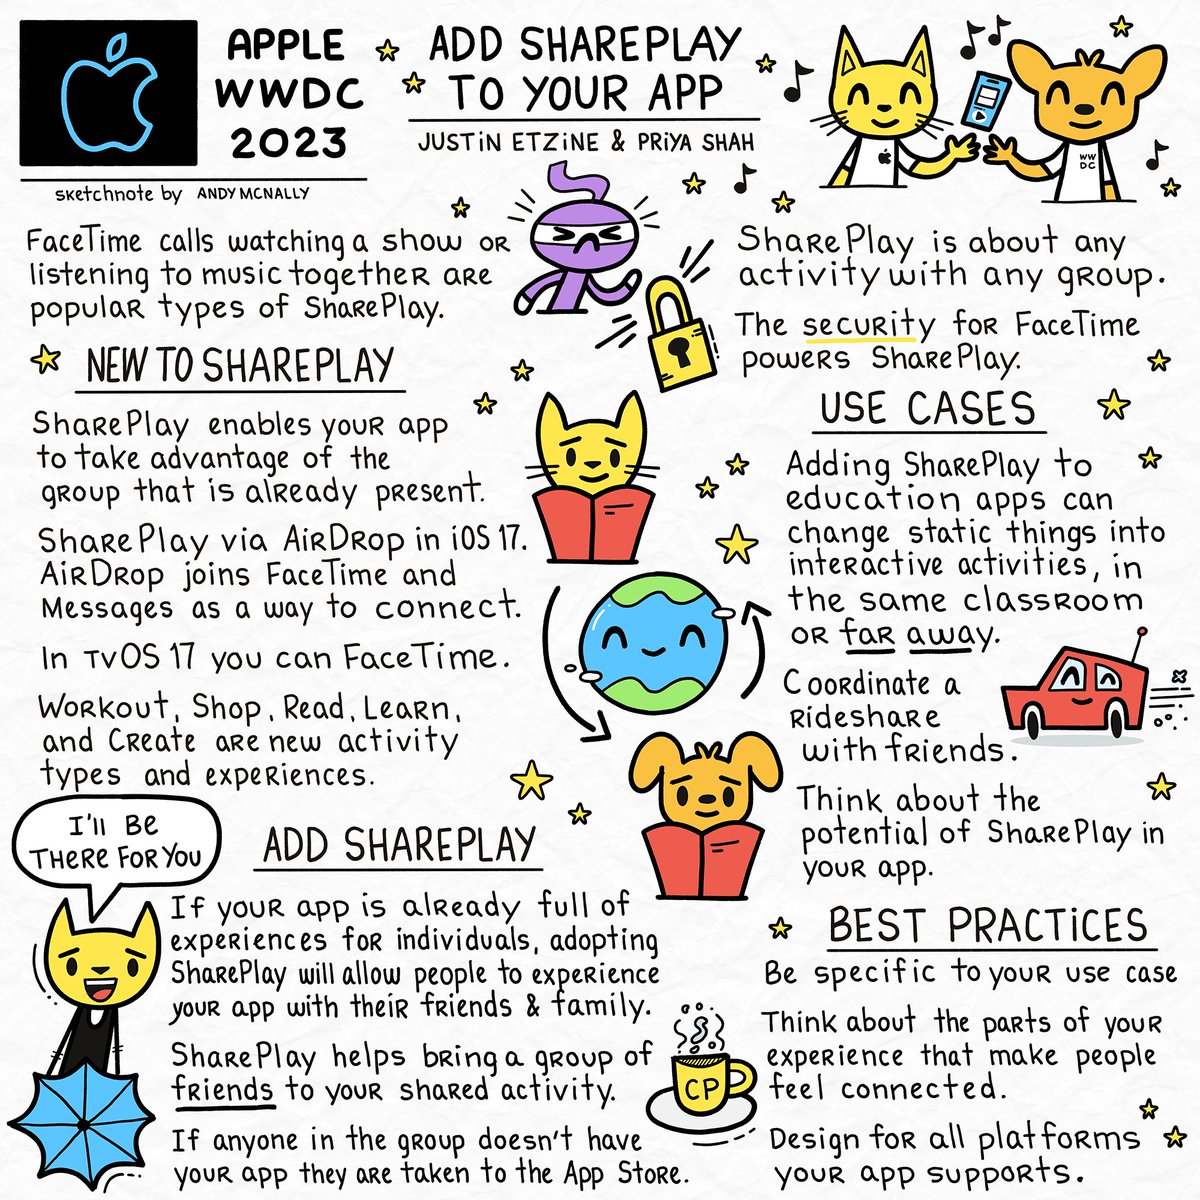 Apple WWDC 2023.
Add SharePlay to Your App.
Sketchnotes from an engaging session on using SharePlay. Learn more about how to turn your apps activities into shareable experiences with friends!
#sketchnote #illustration #conceptsapp #friends #apps #SharePlay #applewwdc #apple